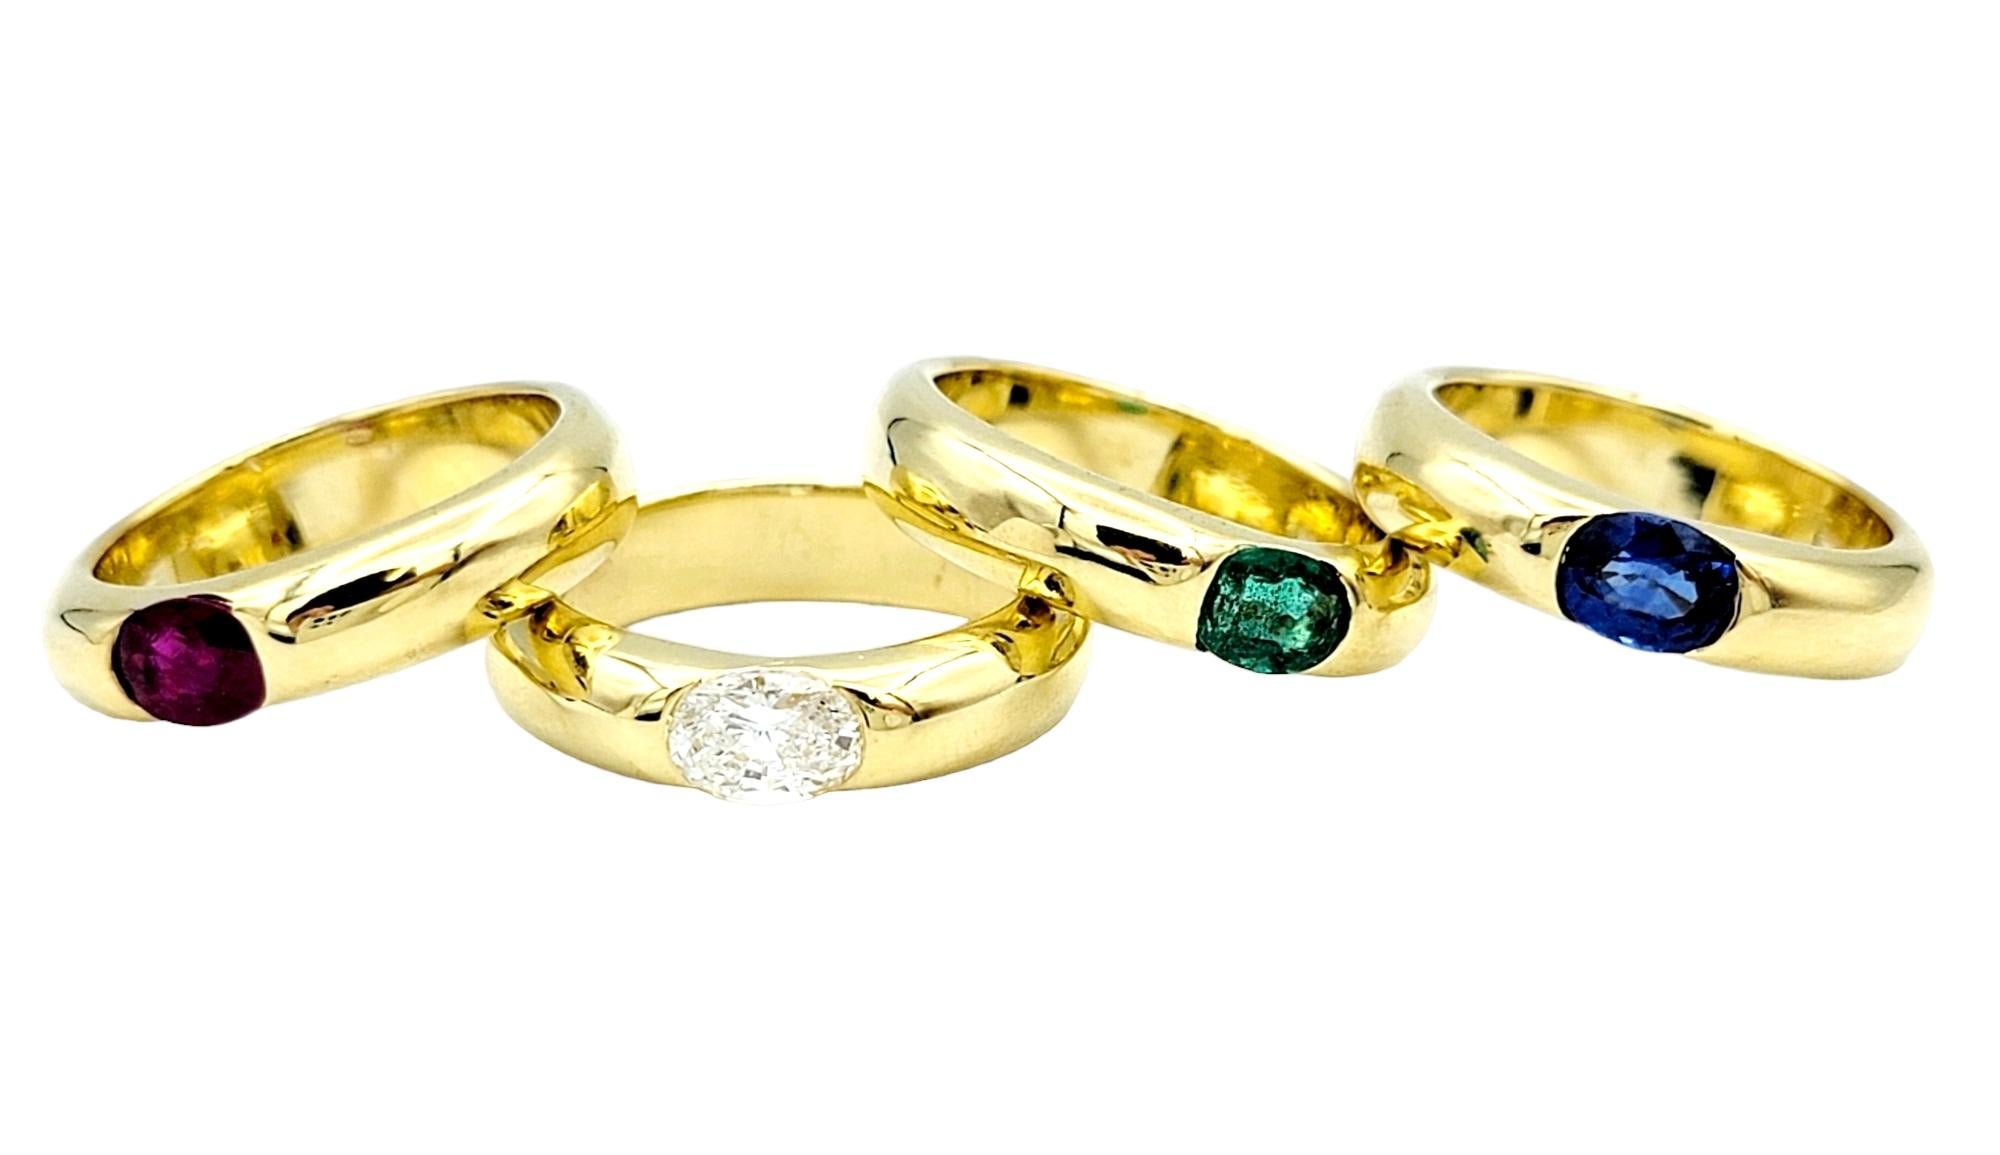 Ring Sizes: 4.5, 4.75 and 5

Indulge in the allure of vibrant gemstones with this exquisite set of four 18 karat yellow gold stacking band rings, each adorned with a unique oval-shaped gemstone at its center. Individually unique, yet harmoniously